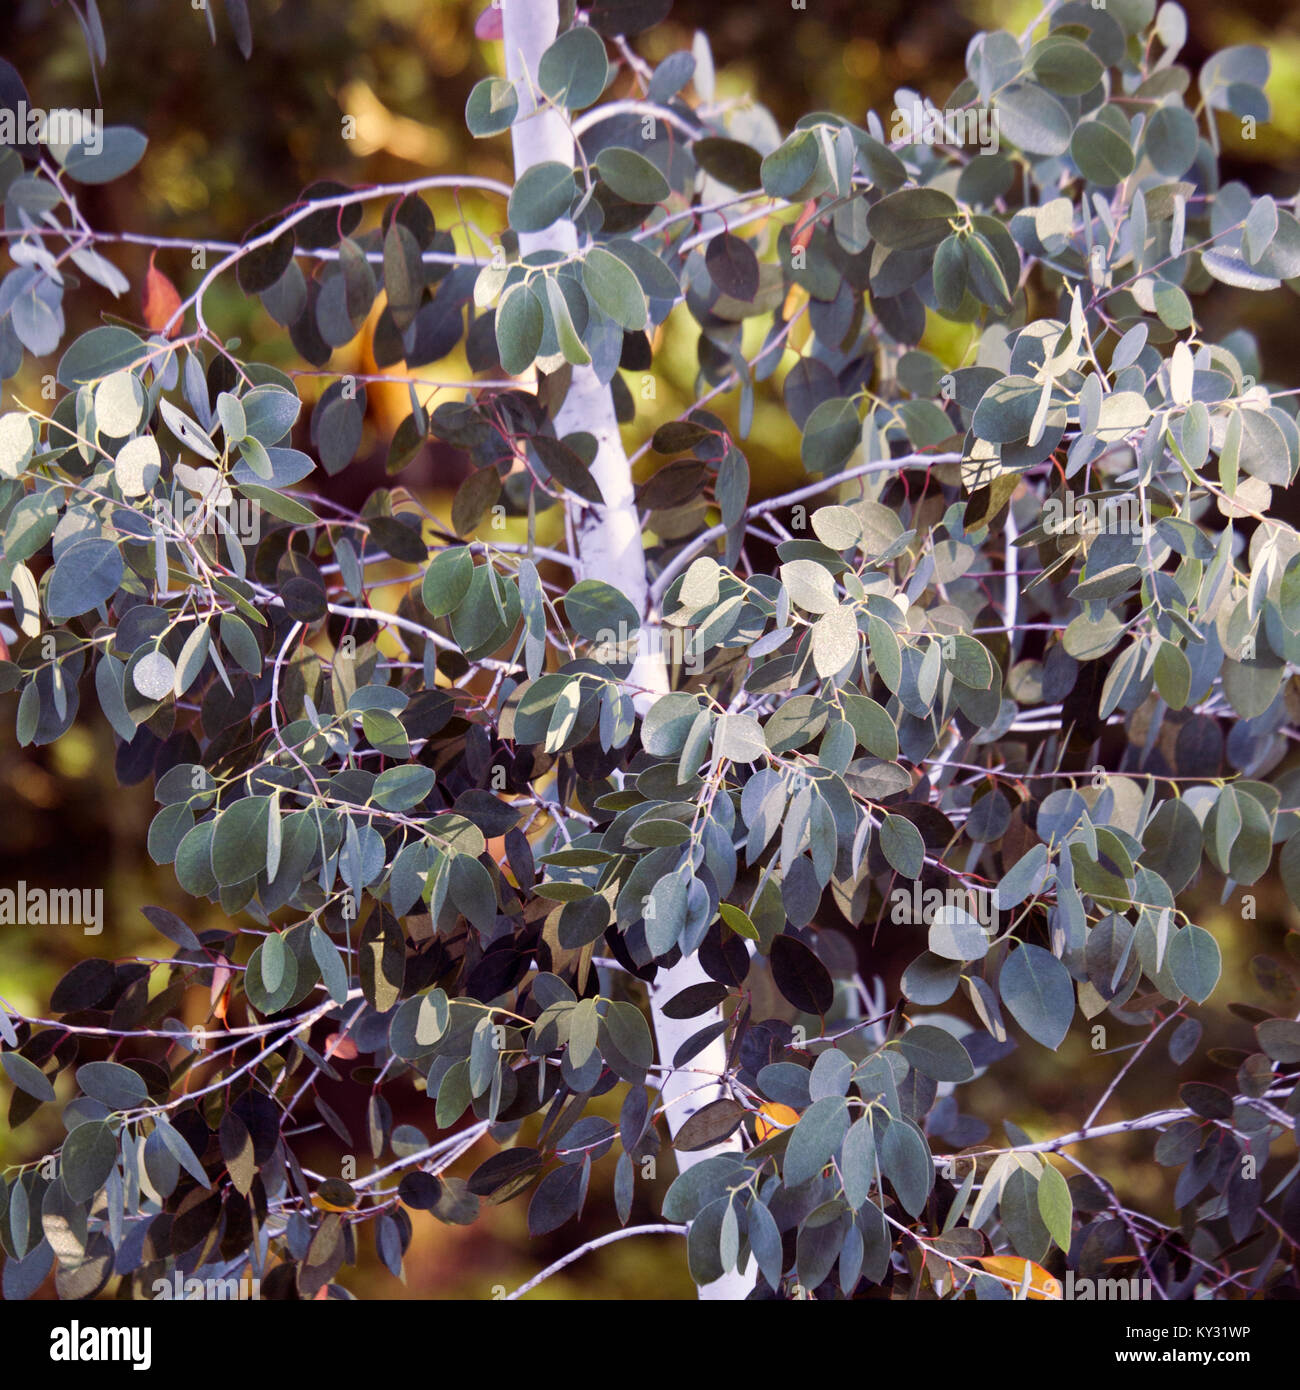 Eucalyptus trees in Summer showing beauty in nature with striking patterns, shape, texture, with a palette of vibrant summer colour, creating an artis Stock Photo